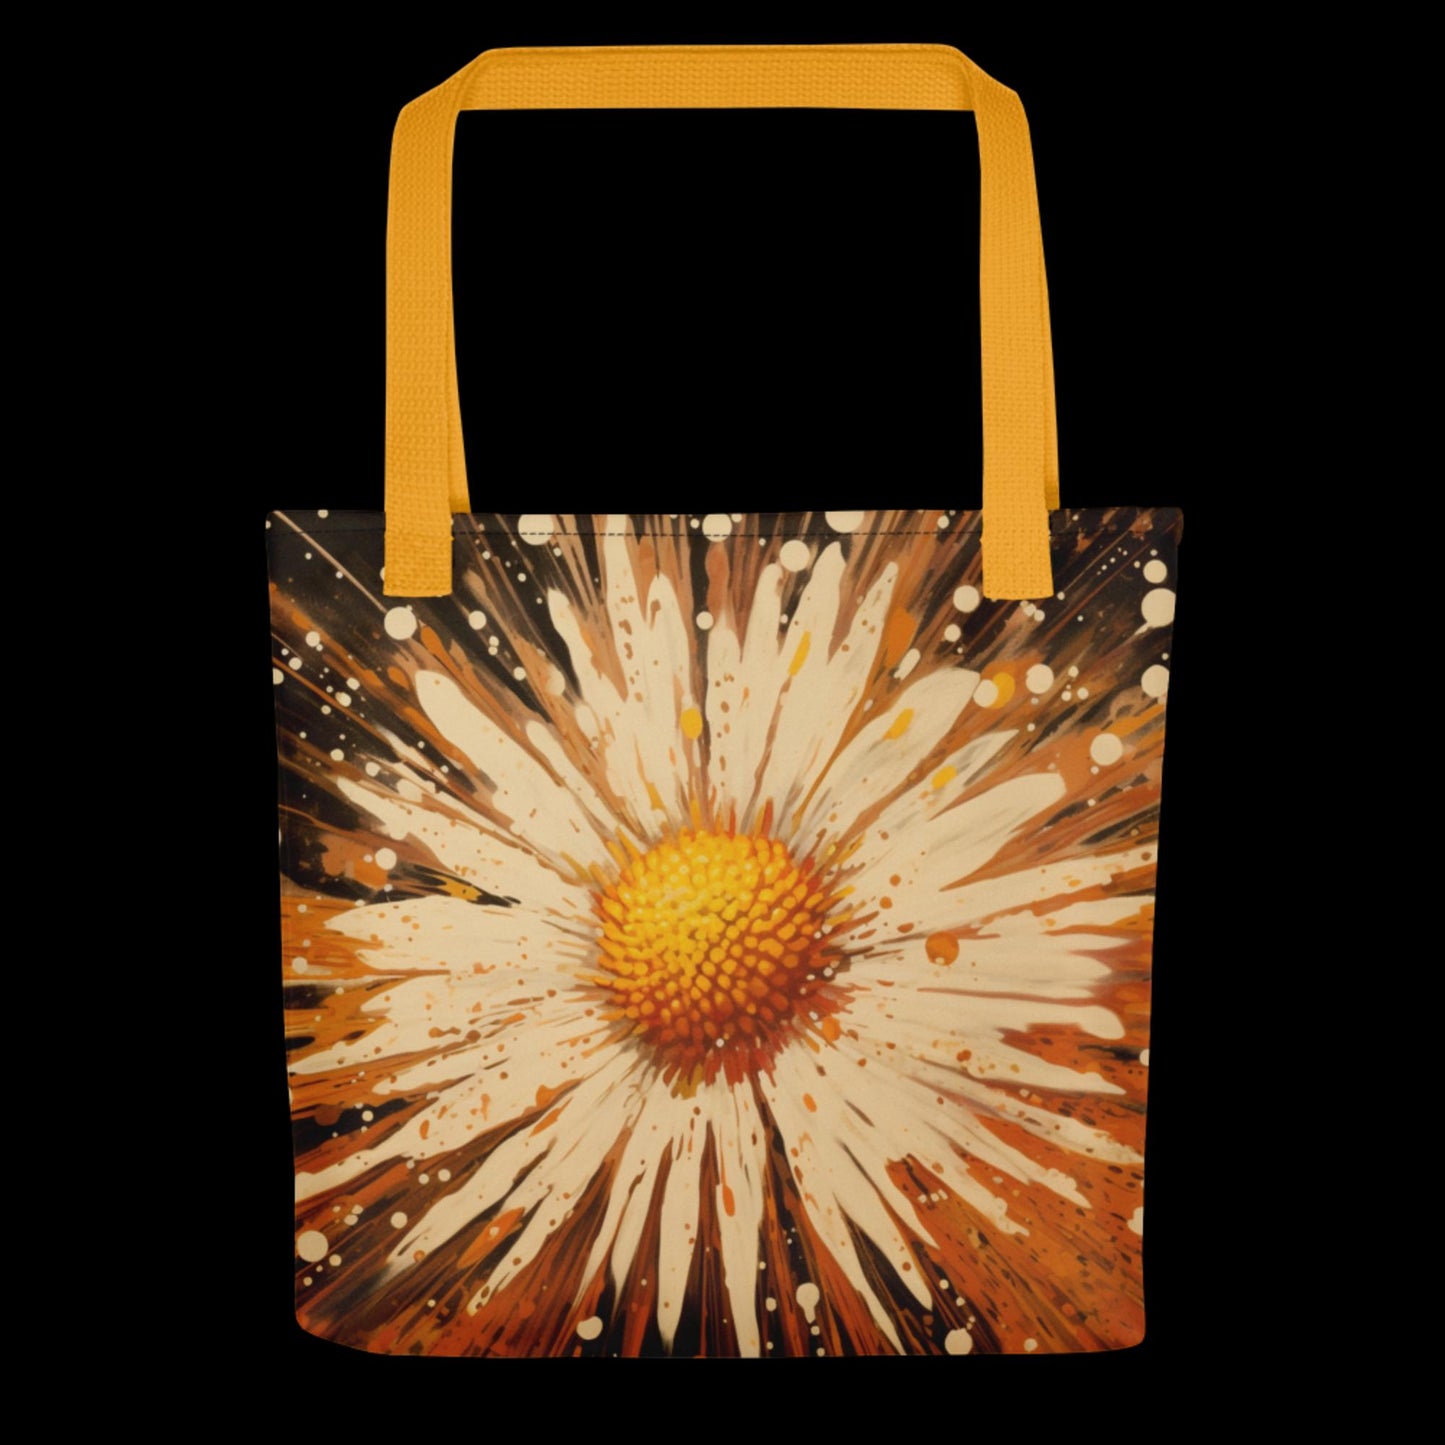 Daisy Explosion! Tote Bag